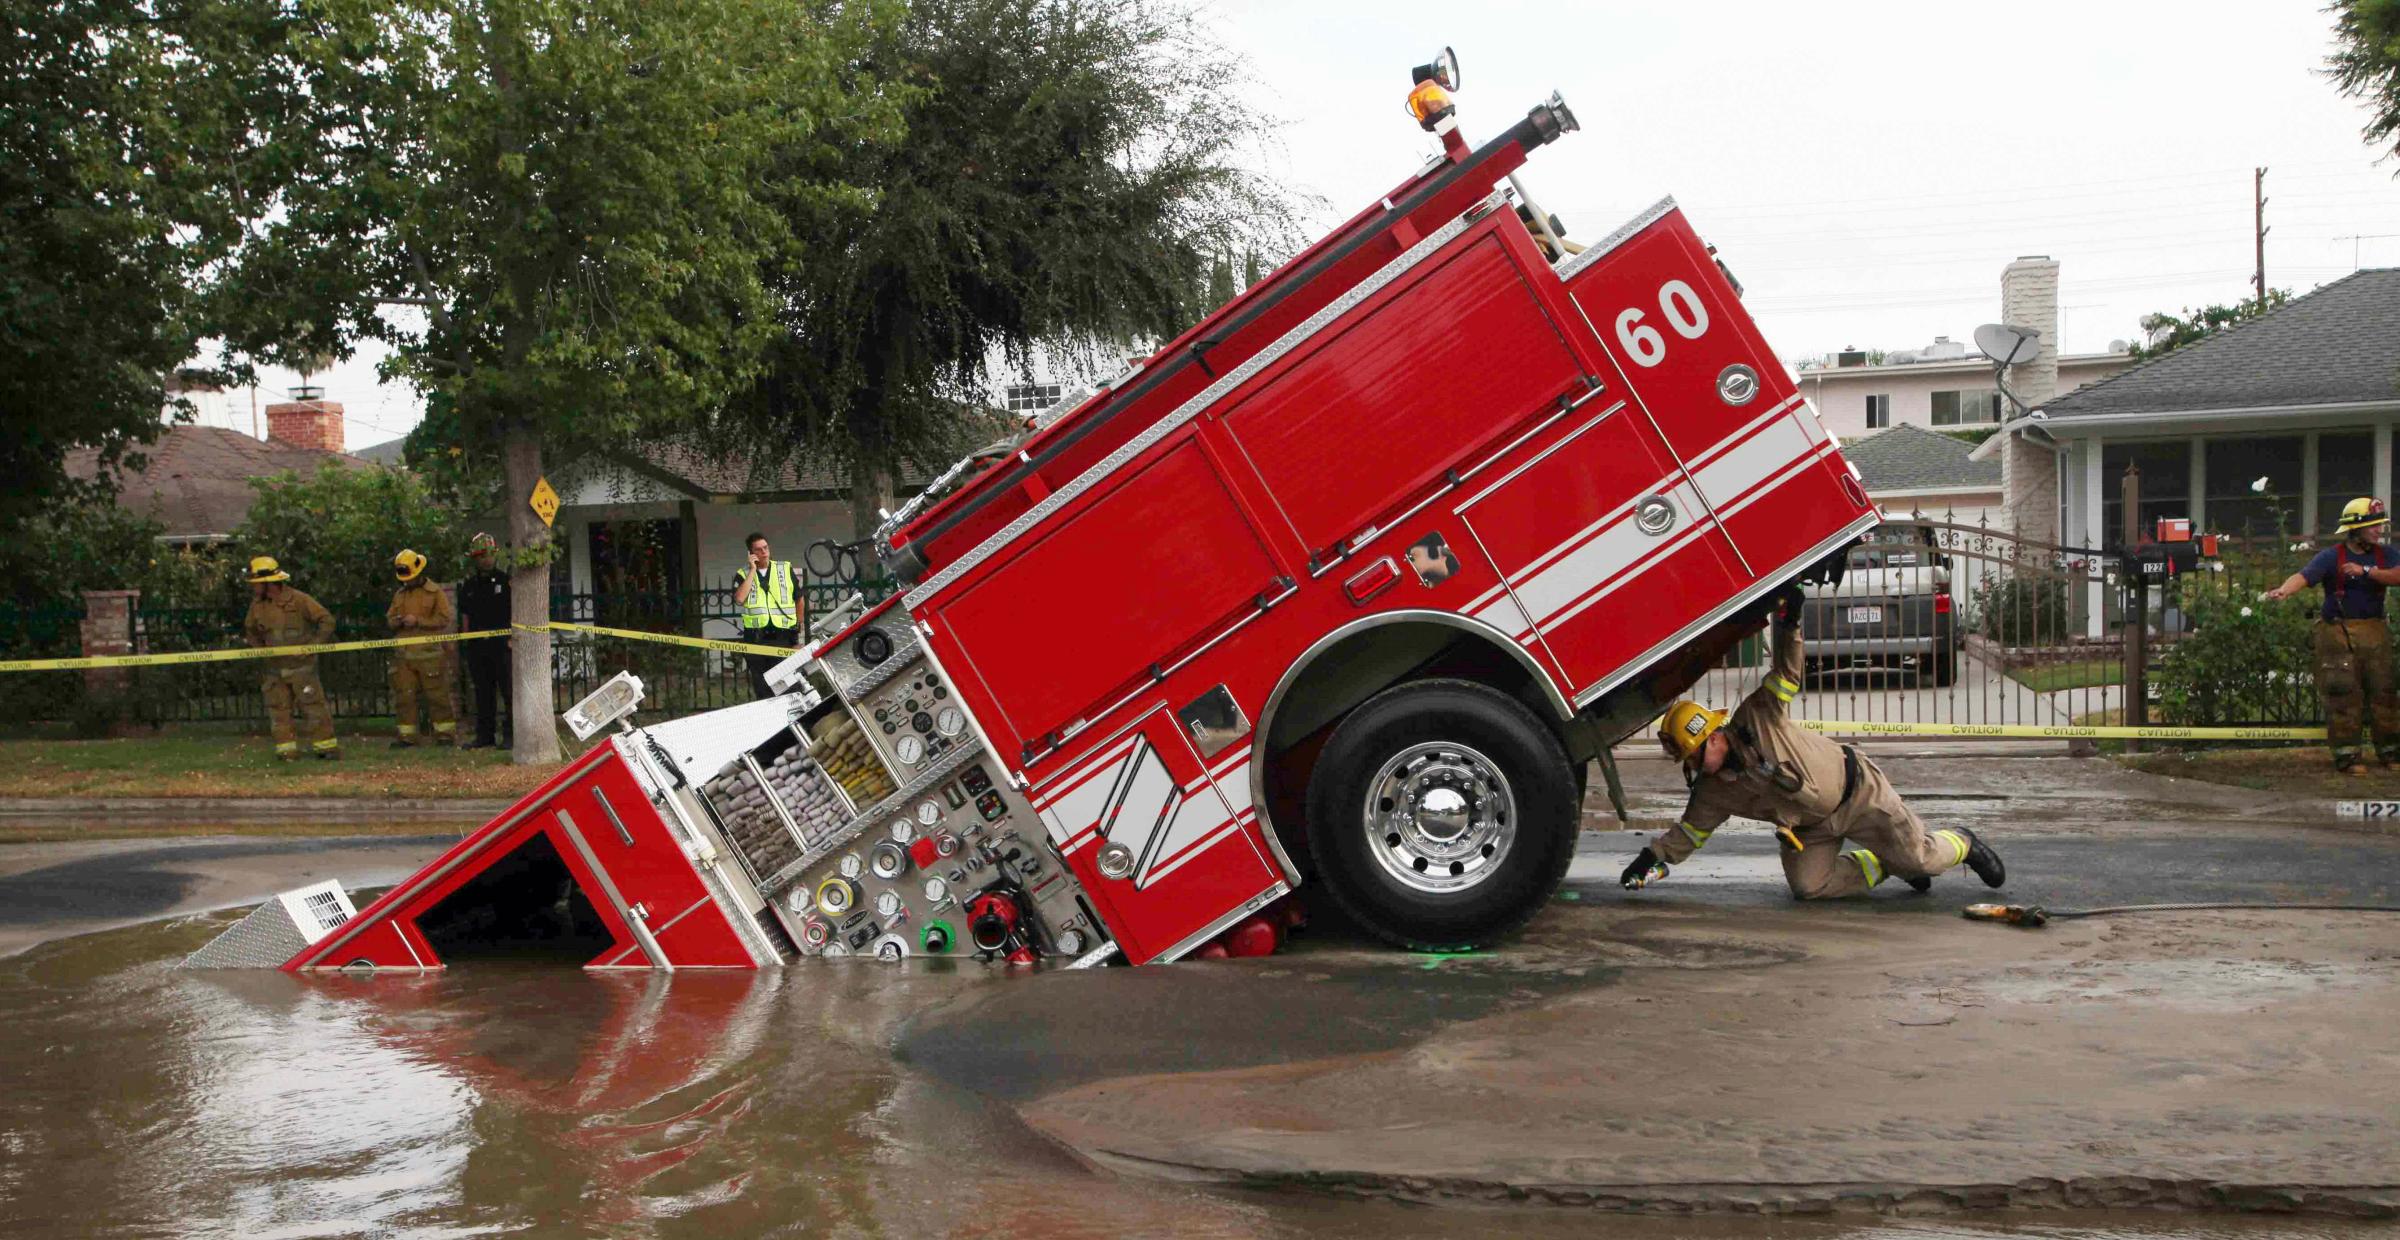 A Los Angeles fireman looks under a fire truck stuck in a sinkhole in the Valley Village neighborhood of Los Angeles, Sept. 8, 2009. Four firefighters escaped injury early Tuesday after their fire engine sunk into a large hole caused by a burst water main in the San Fernando Valley, authorities said.